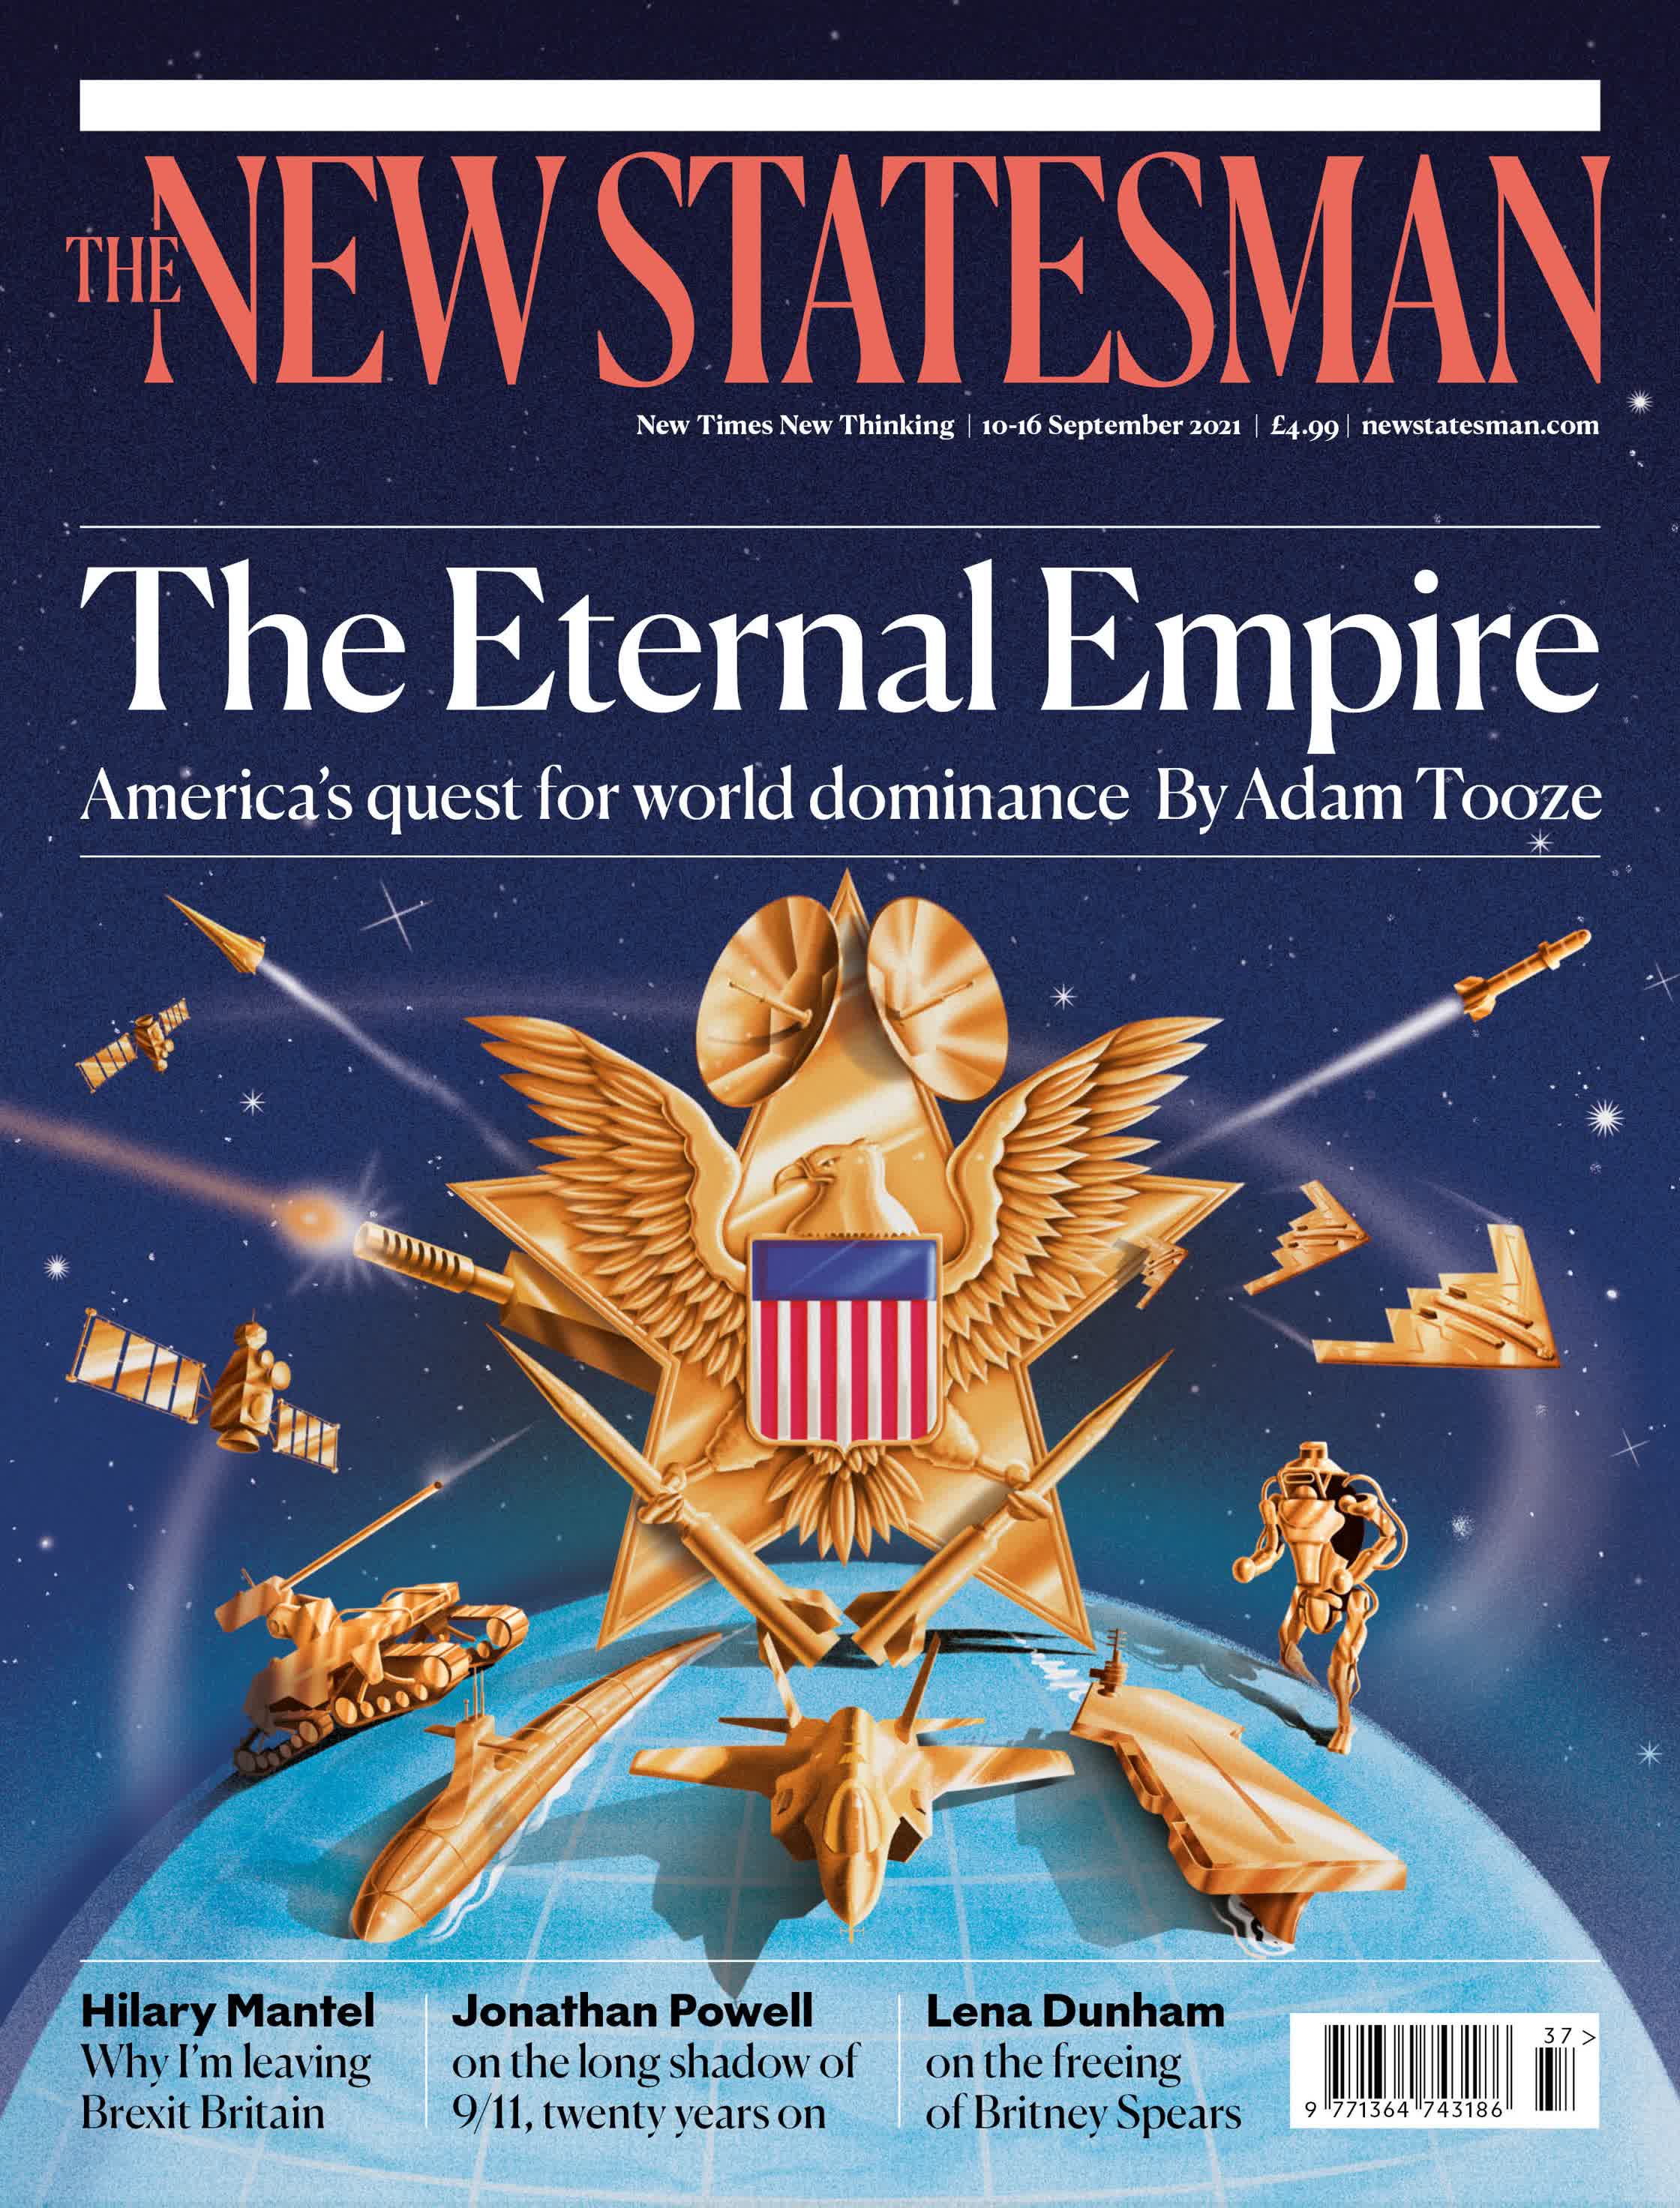 The New Statesman_Cover_The Eternal Empire.jpg